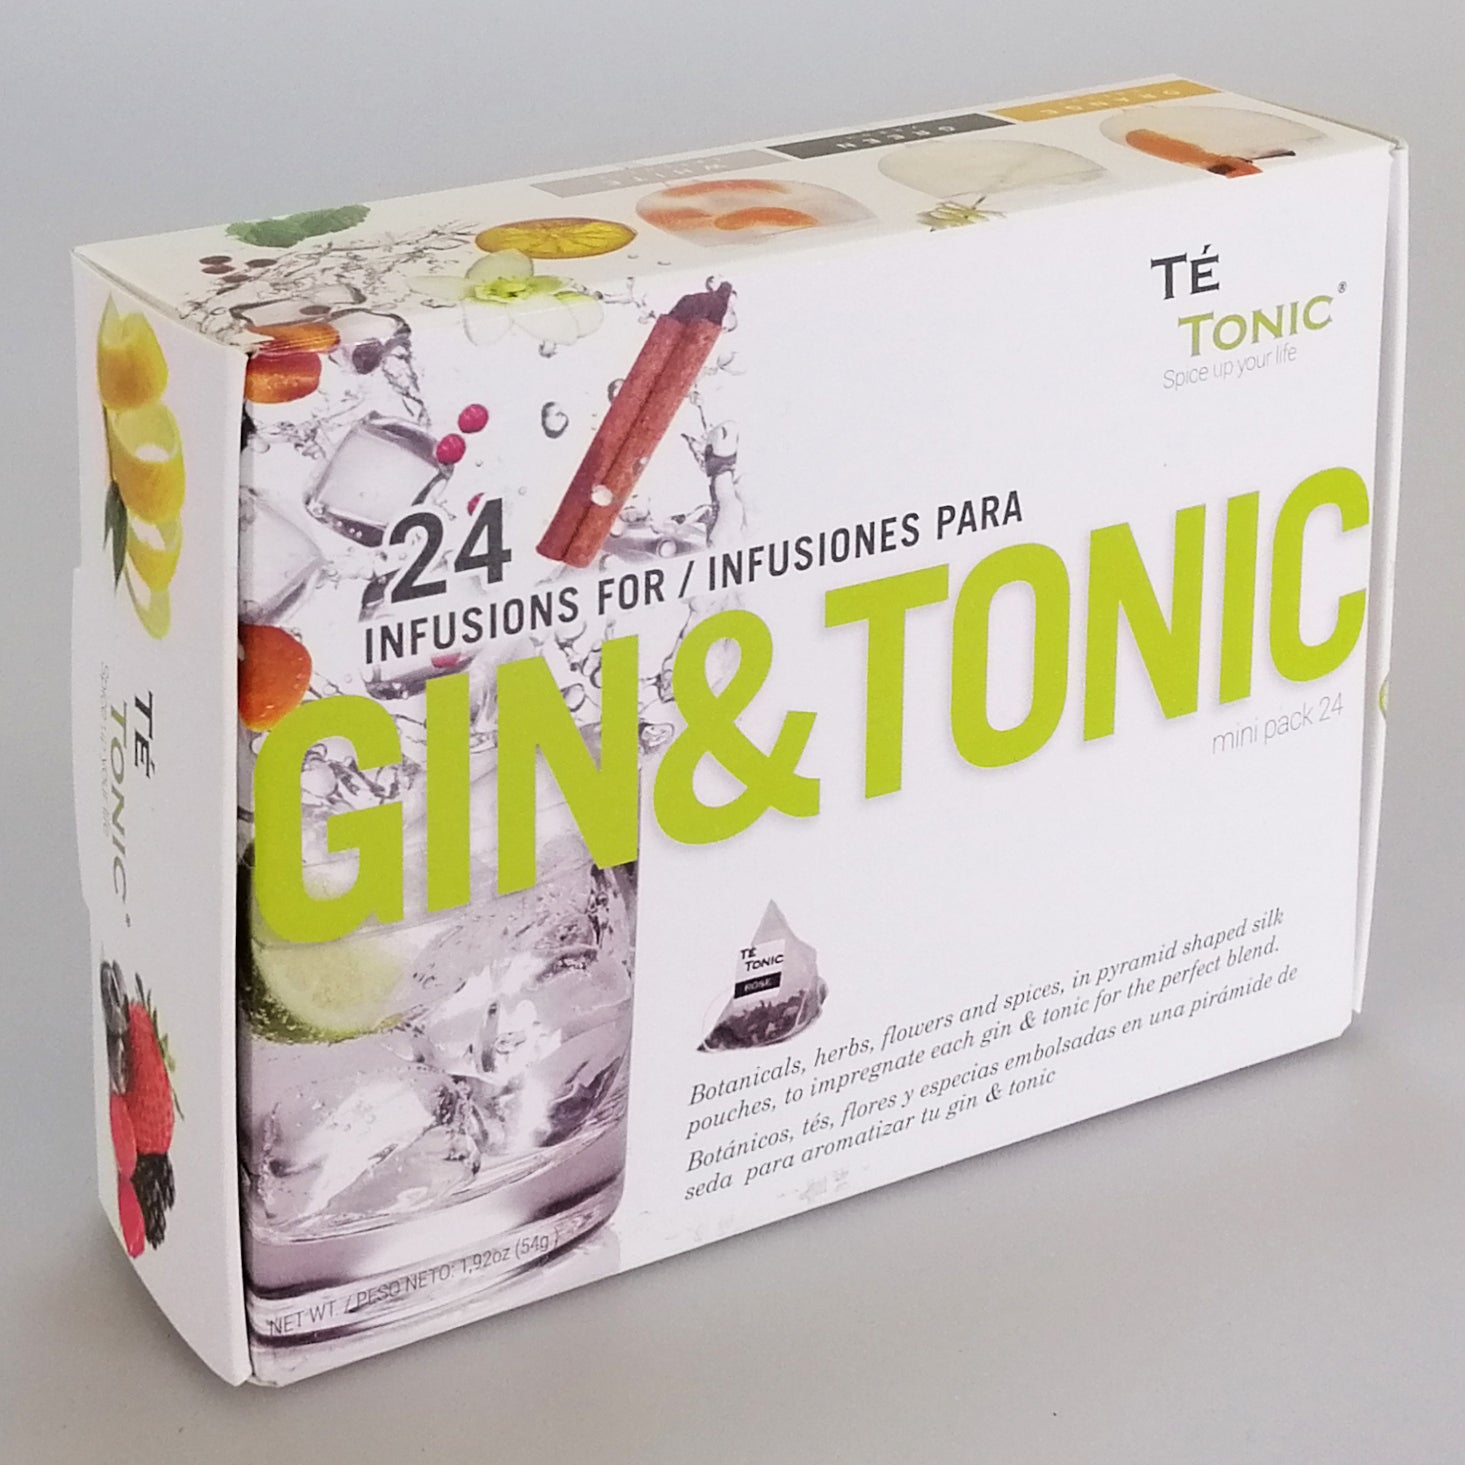 Gin & Tonic Mini Infusion Pack - 24 Infusions